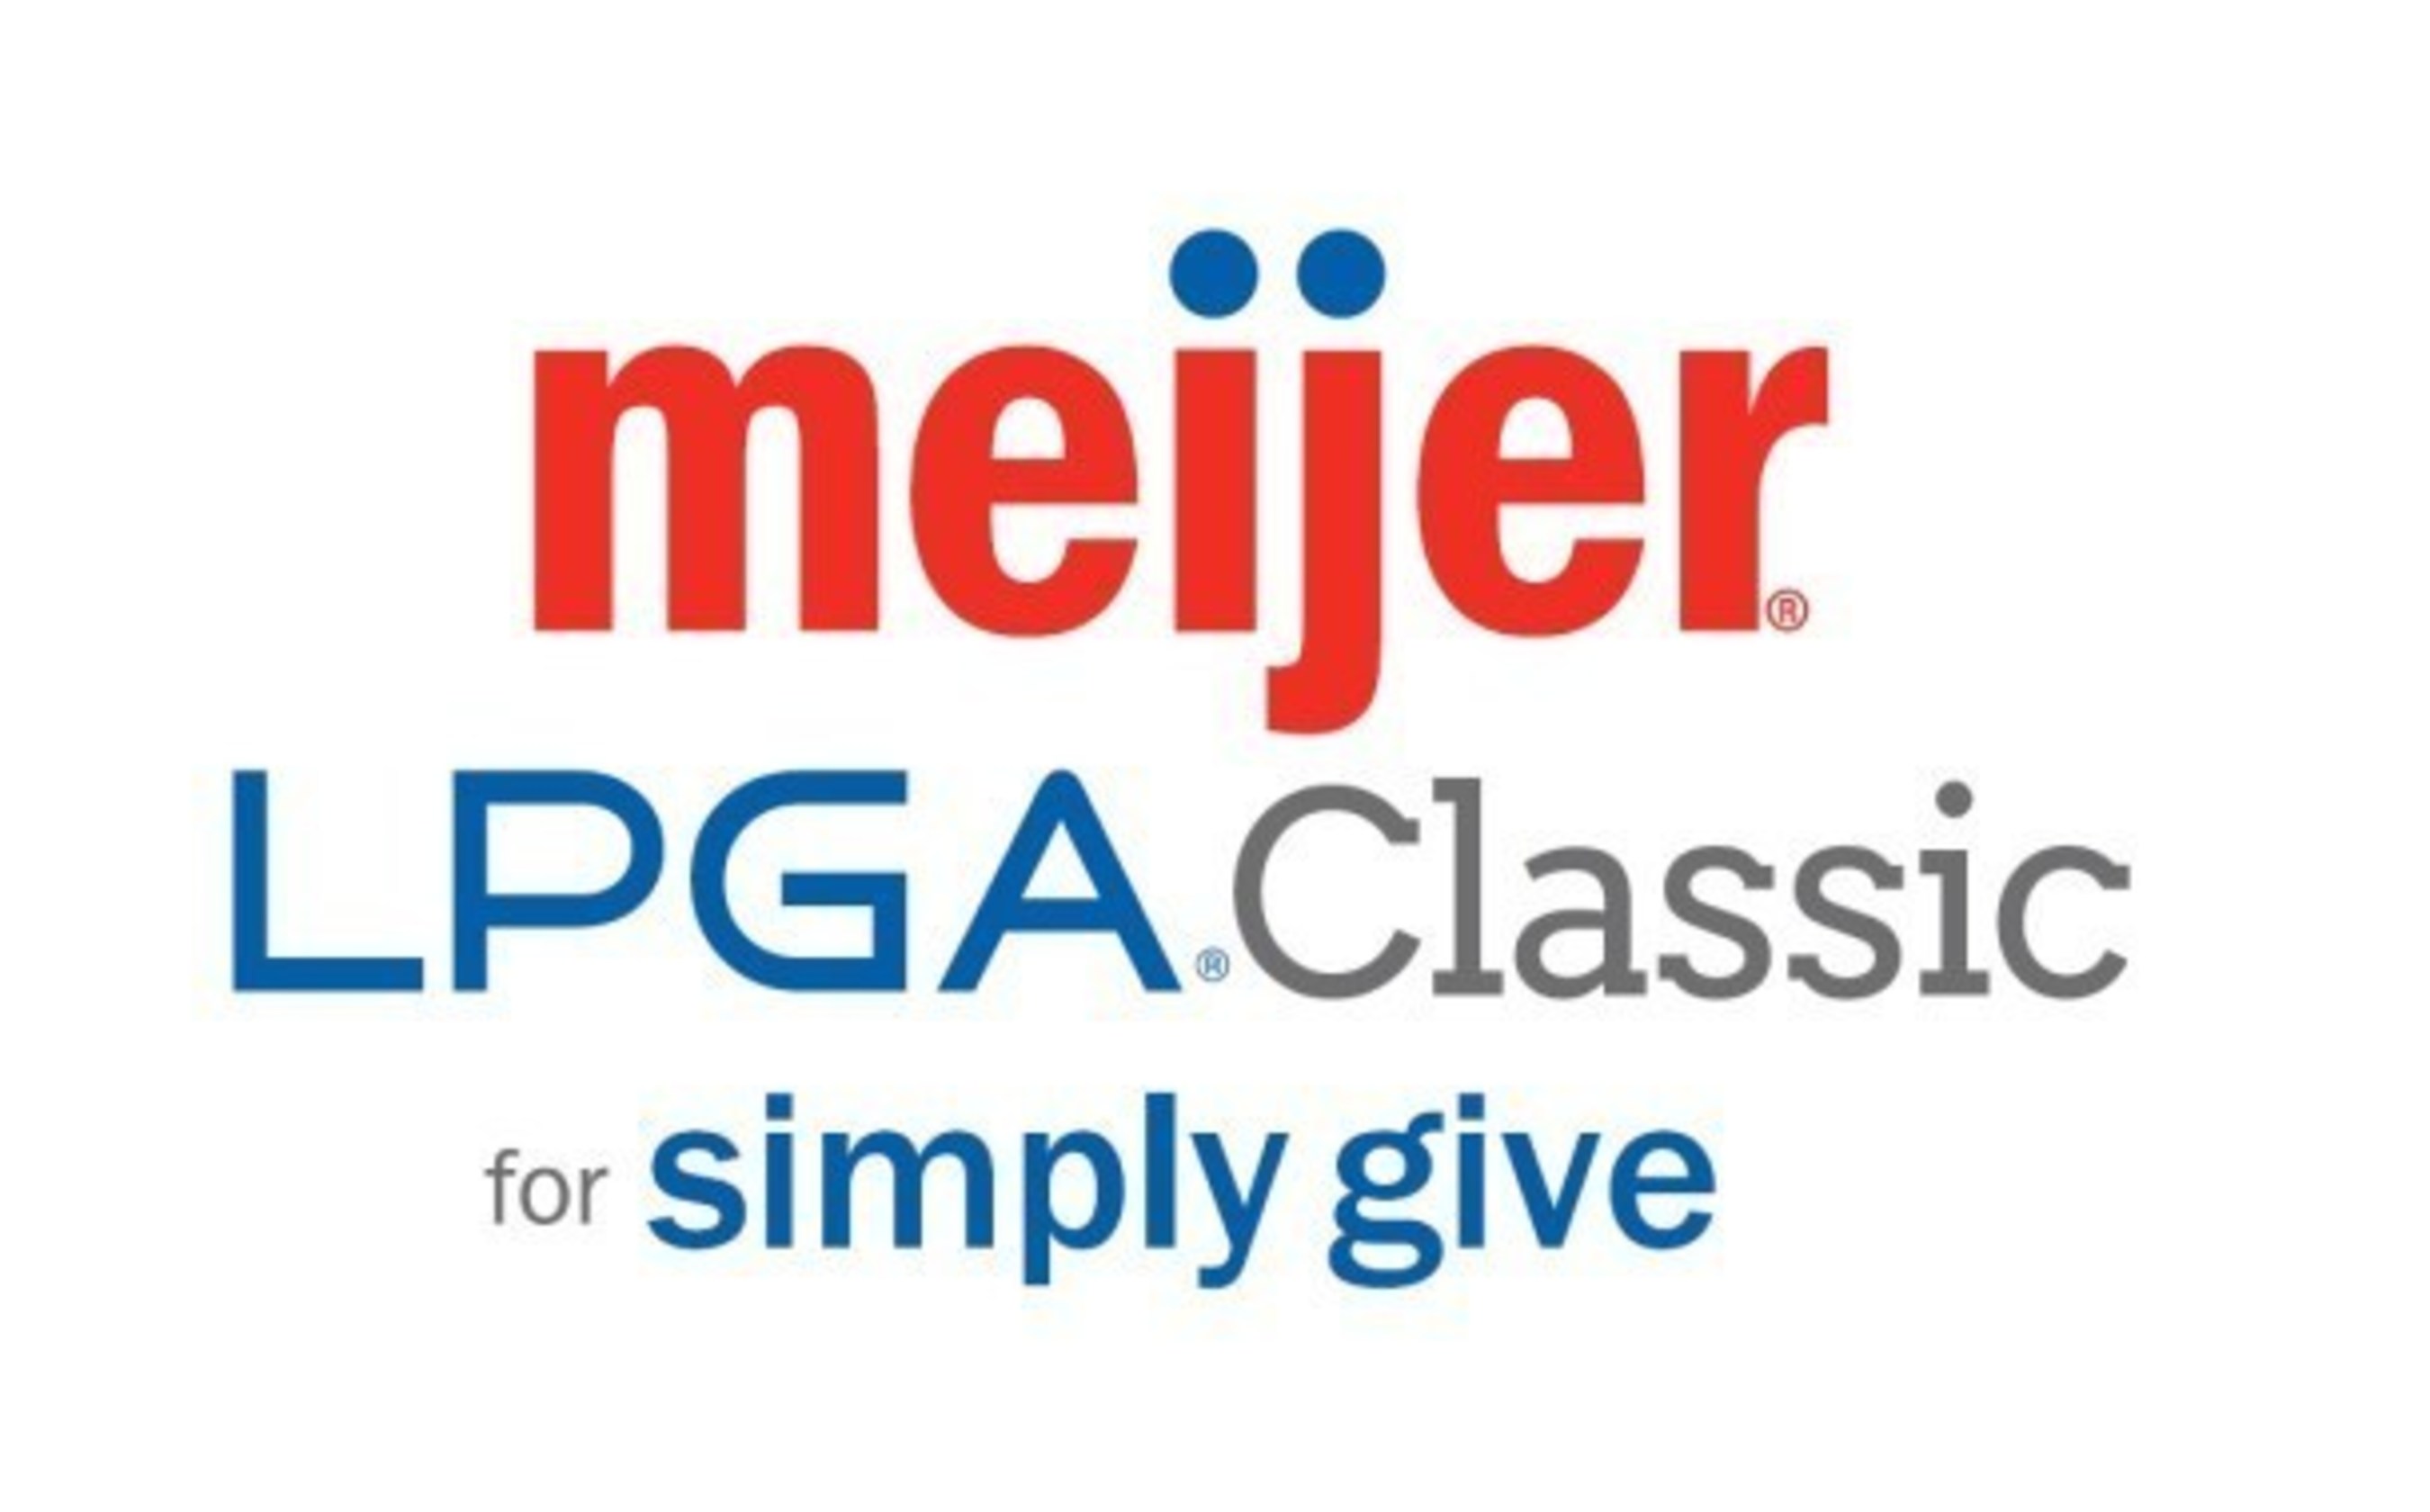 The 2016 Meijer LPGA Classic for Simply Give tournament will be held June 13-19 at Blythefield Country Club, and benefit Meijer's Simply Give program that restocks the shelves of food pantries across the Midwest.